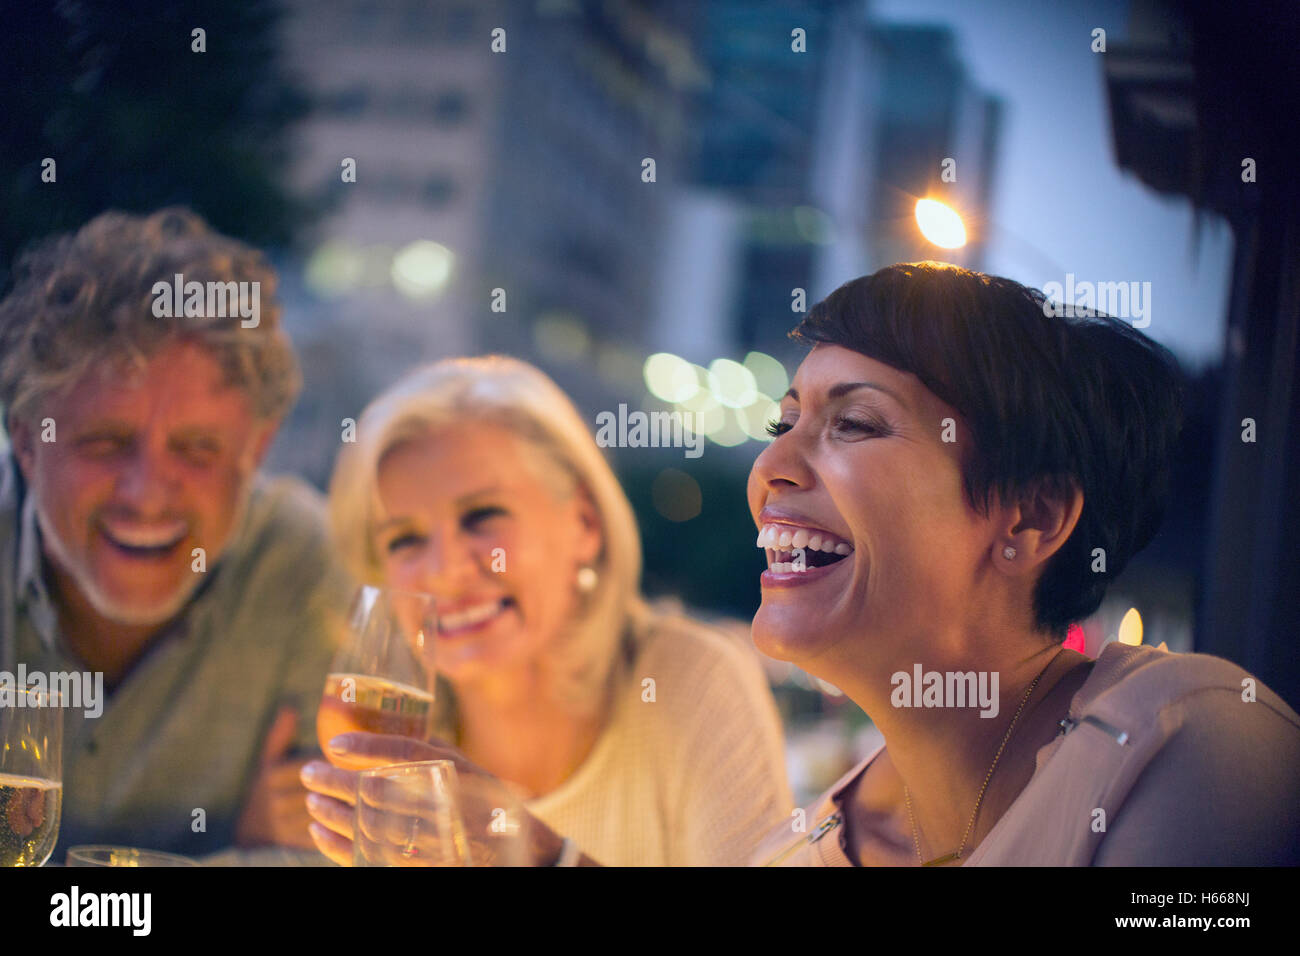 Laughing friends drinking white wine at urban sidewalk cafe Stock Photo